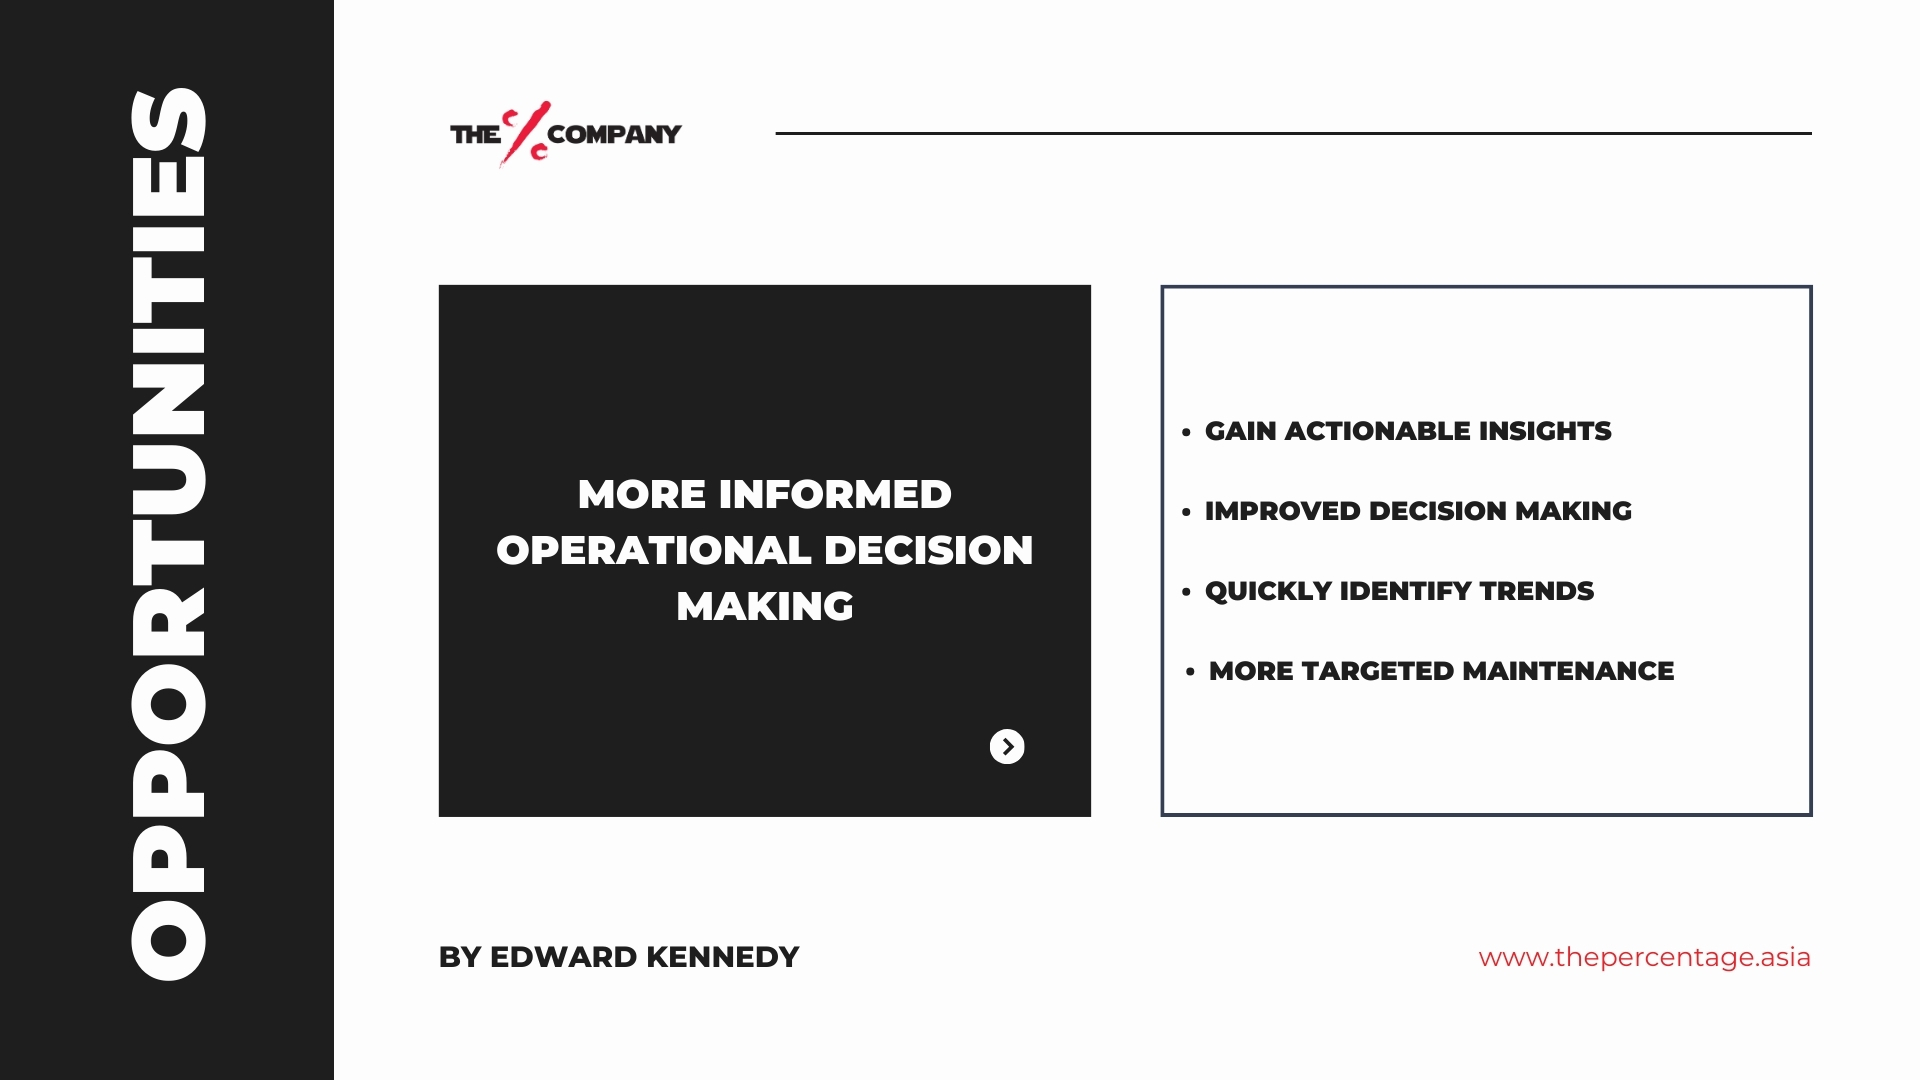 More informed decisions about their operations more quickly and more accurately